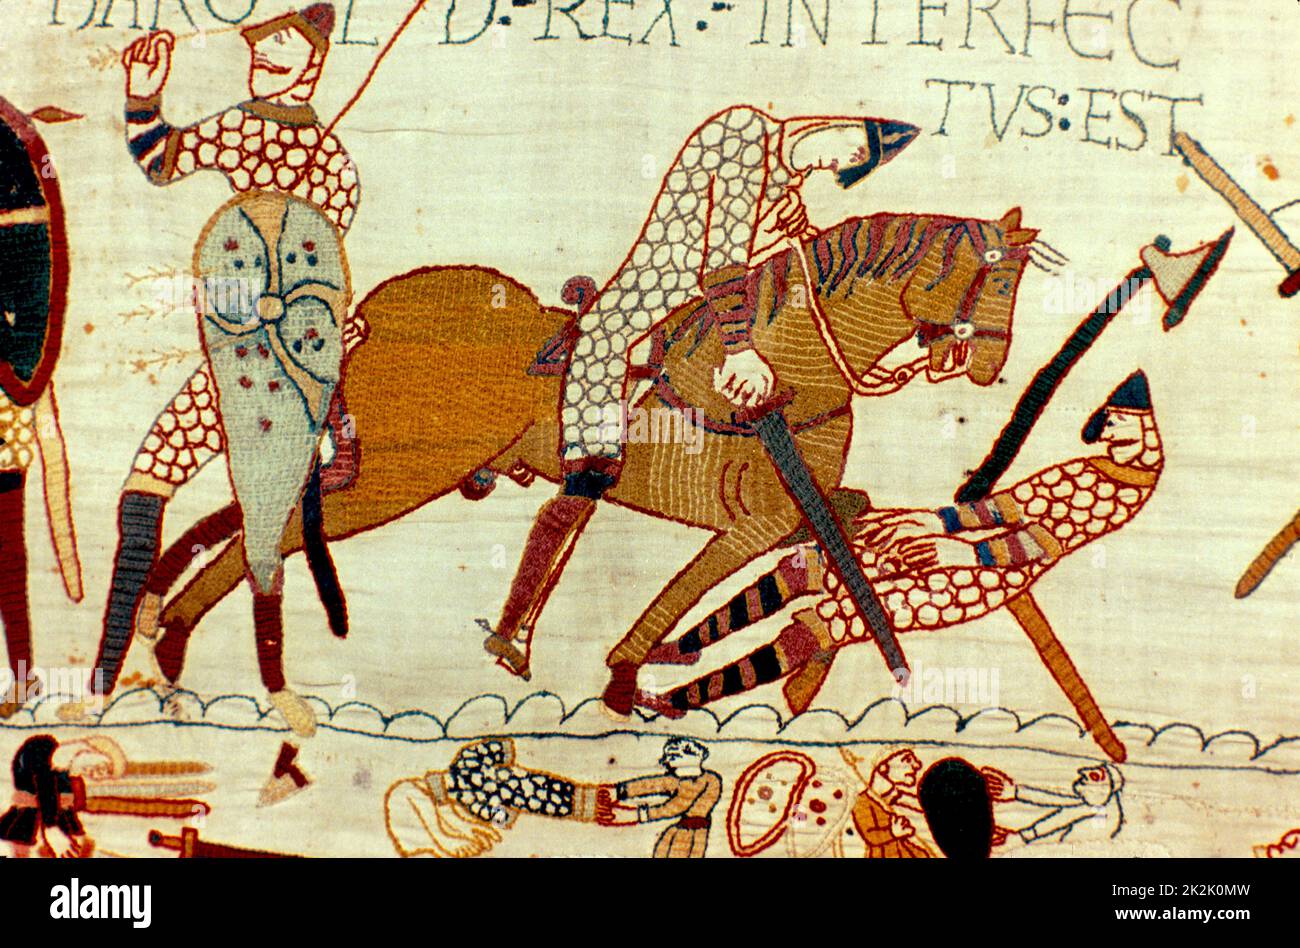 Bayeux Tapestry 1067: Battle of Hastings, 14 October 1066. The death of Harold II, last Anglo-Saxon king of England. Left, figure pulling arrow from eye and then being cut down by Norman knight. Armour Chain Mail Sword Axe Textile Stock Photo